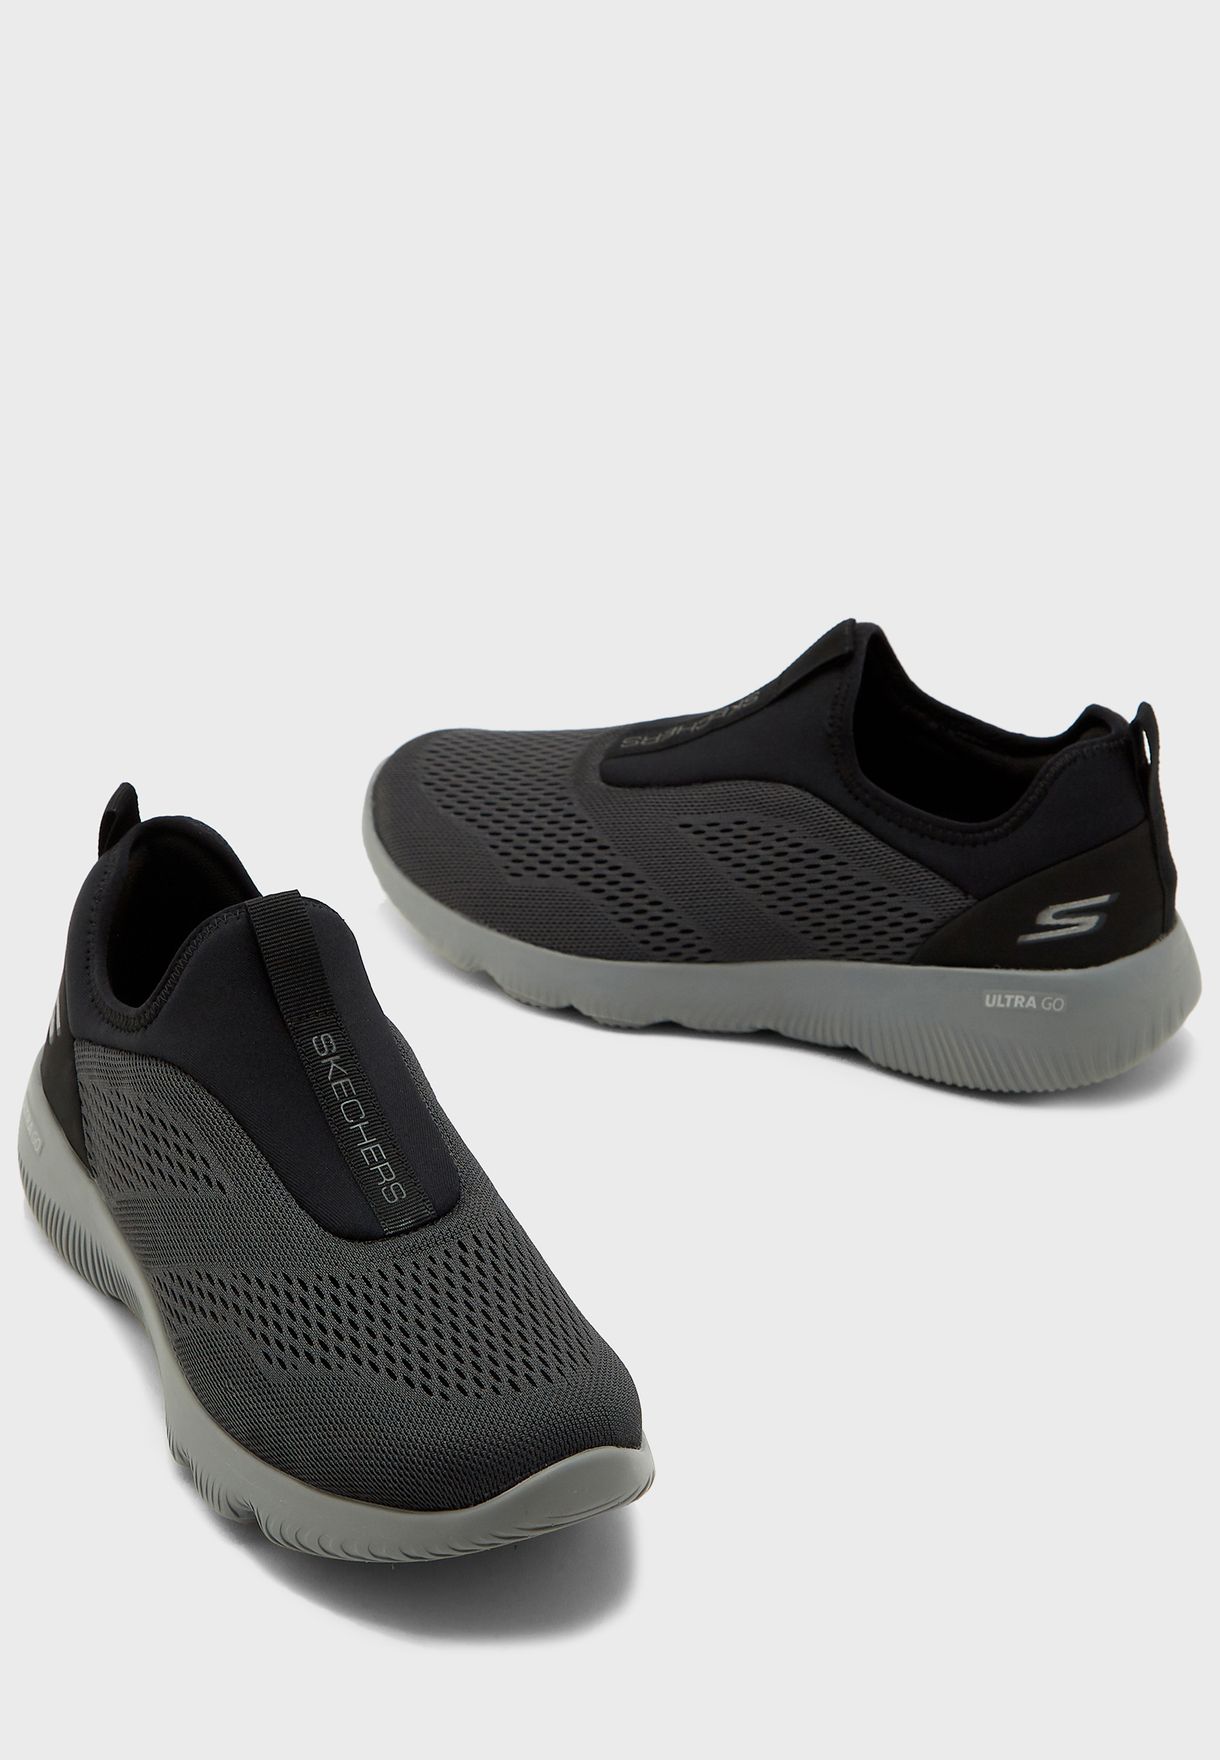 where can i find skechers shoes in riyadh